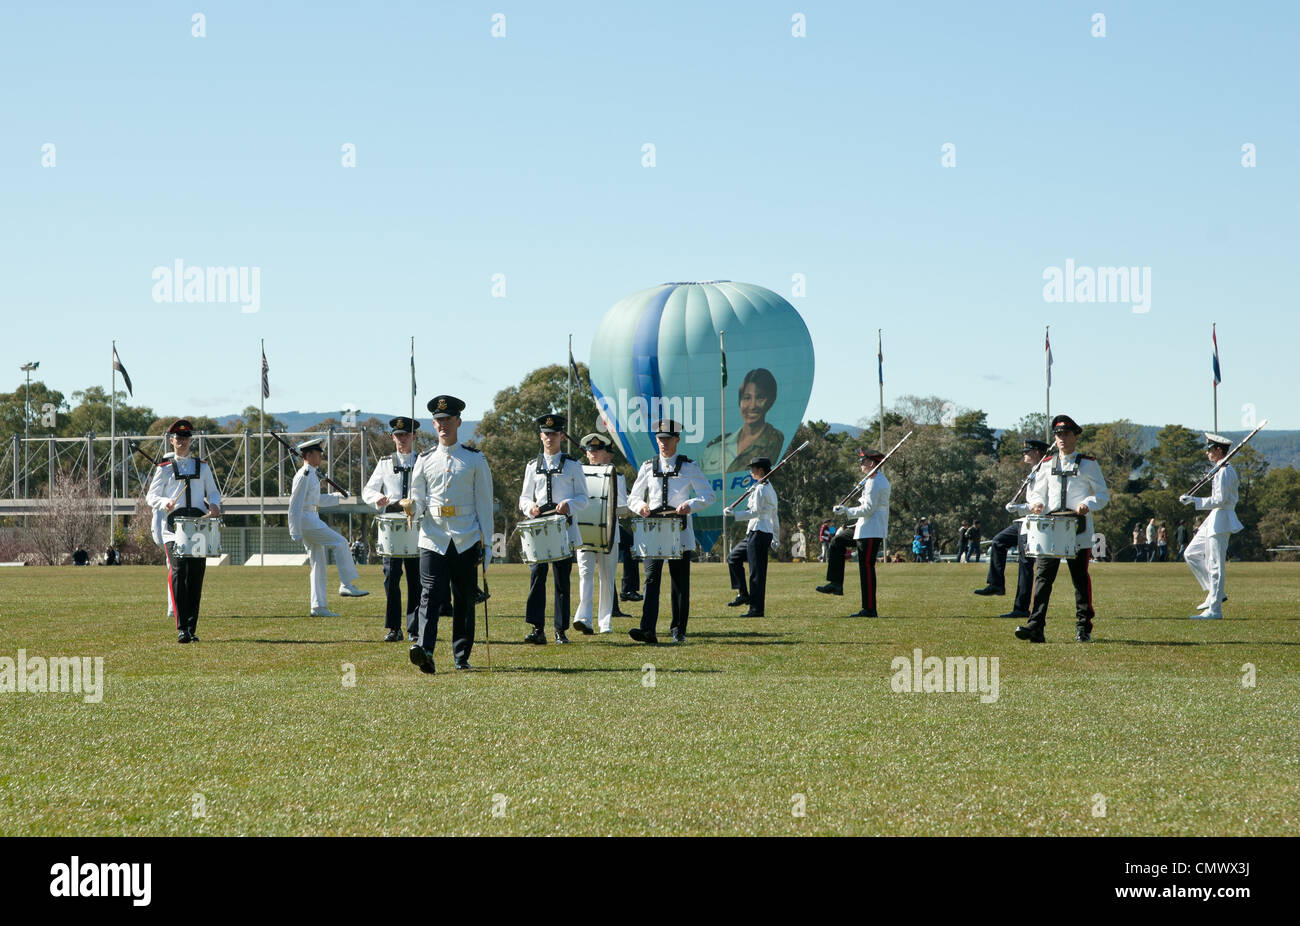 armed forces band at the australian defence force academy Stock Photo